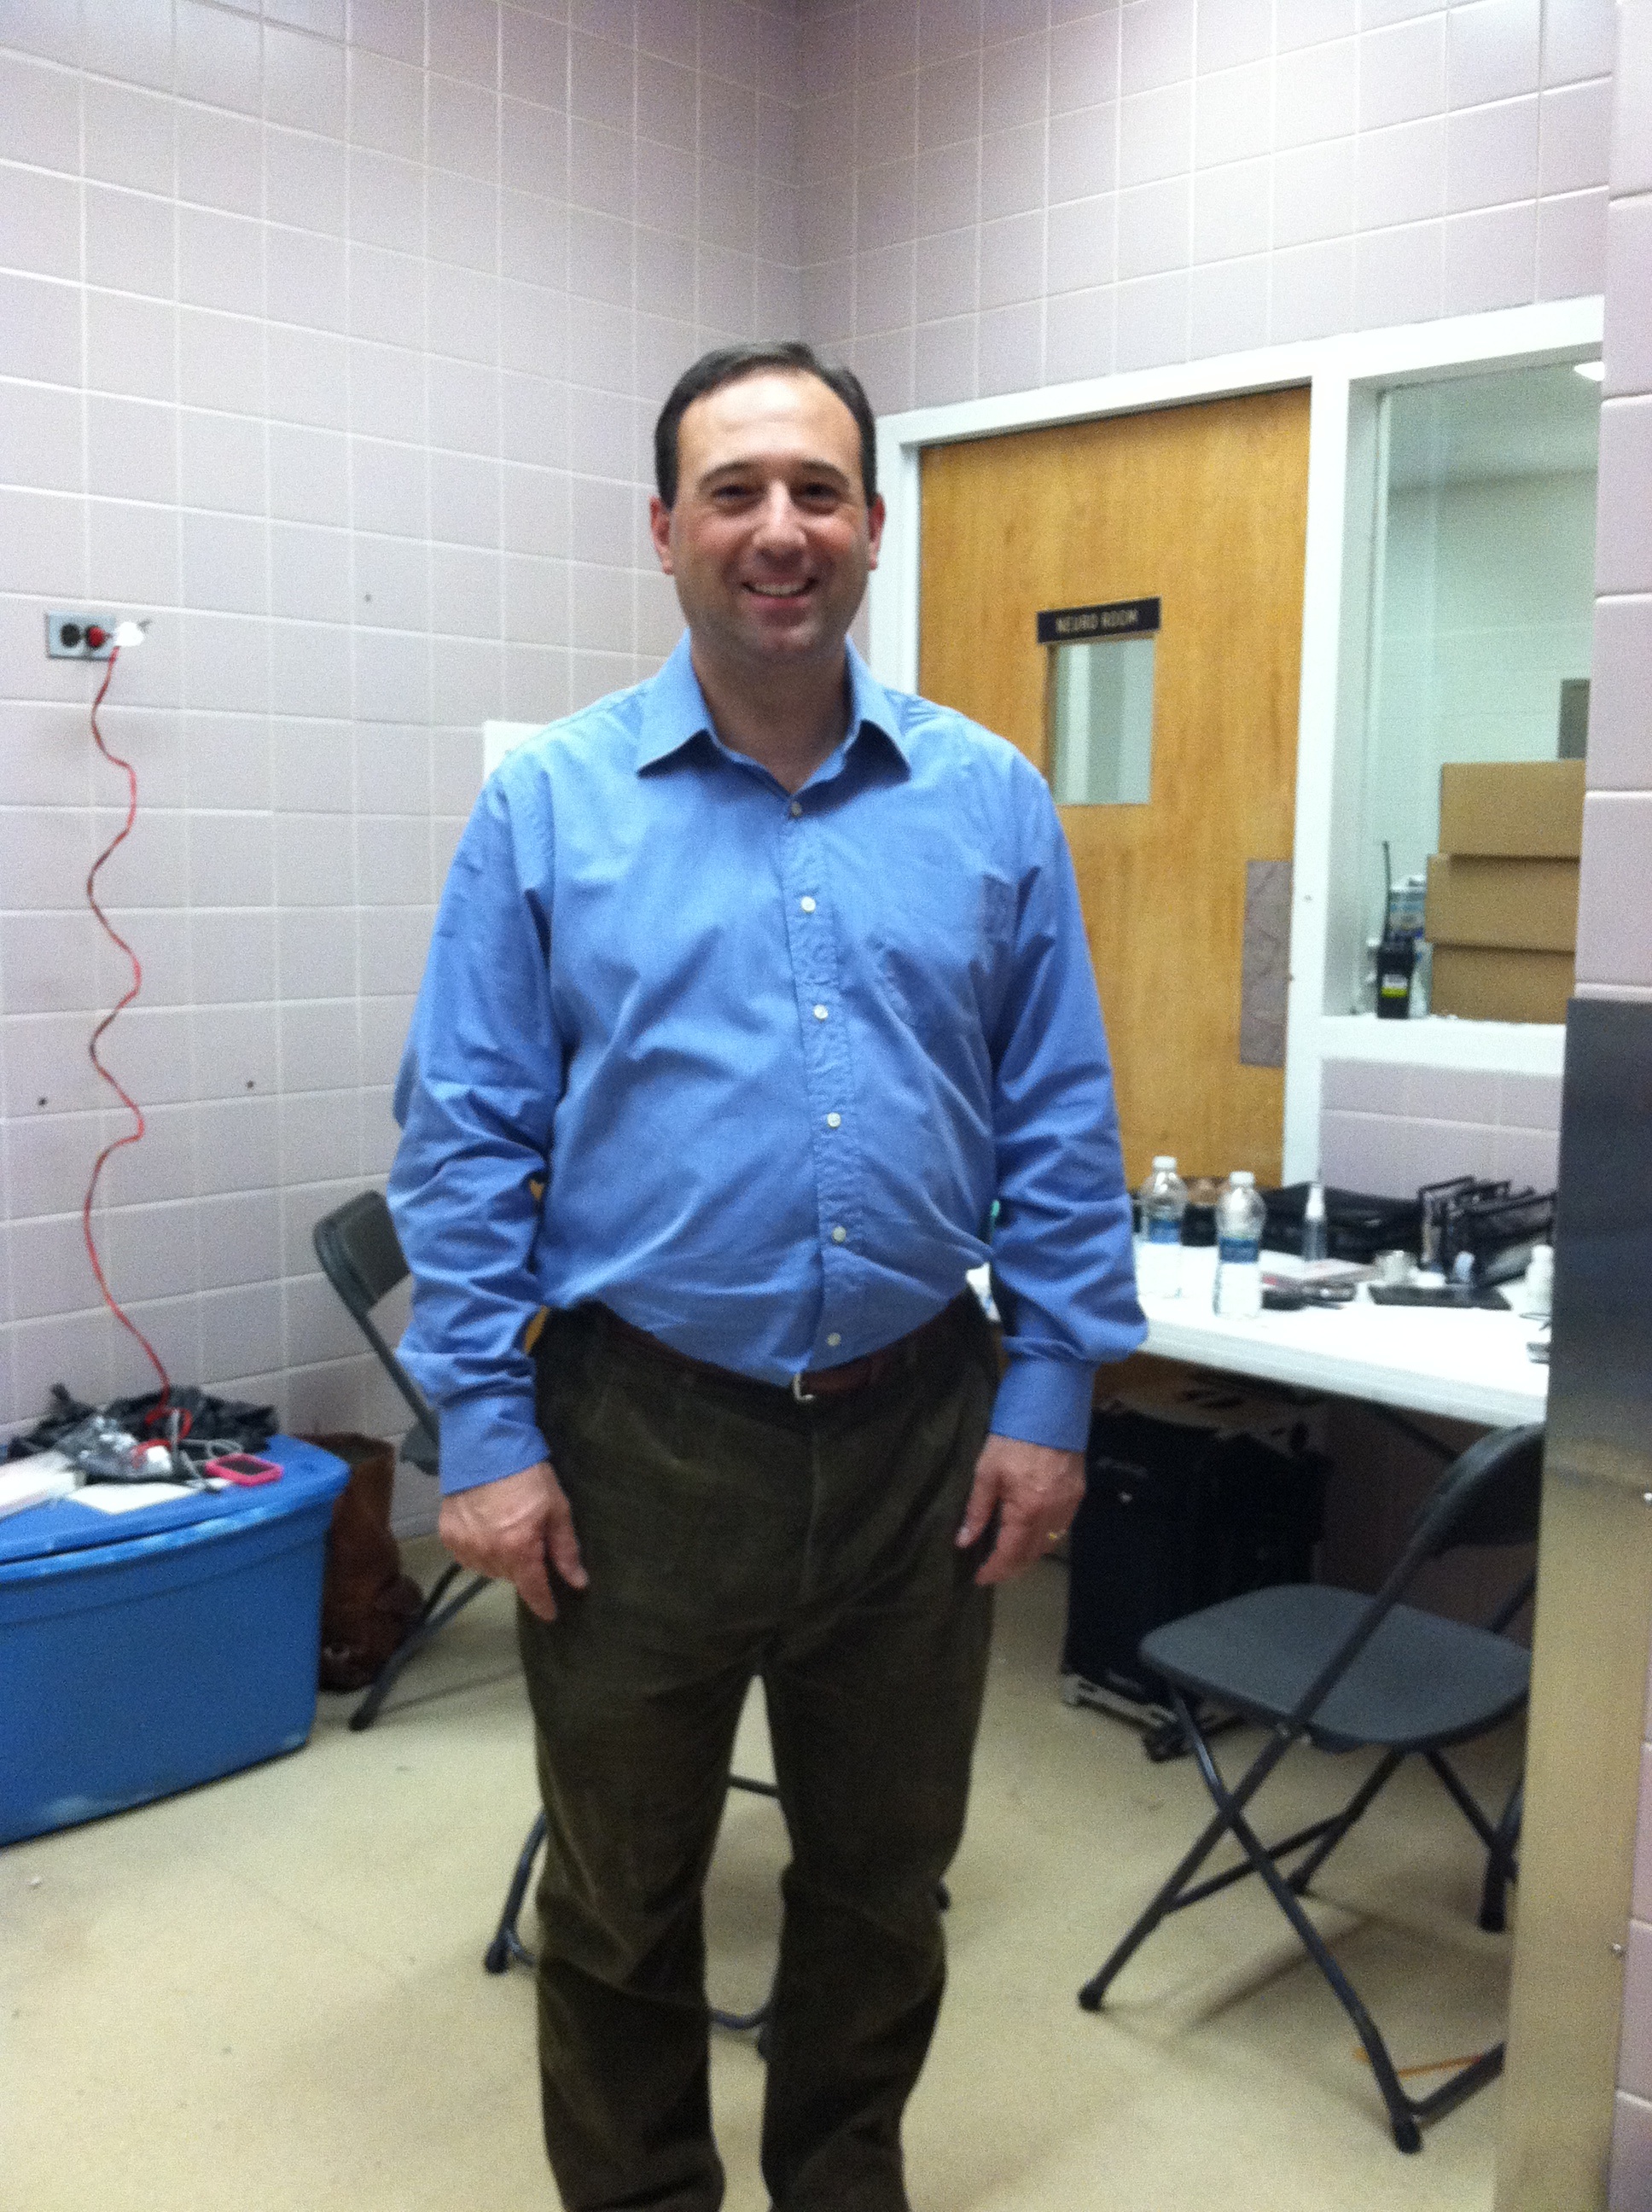 Rob Sciglimpaglia as Larry Dean on set as of 